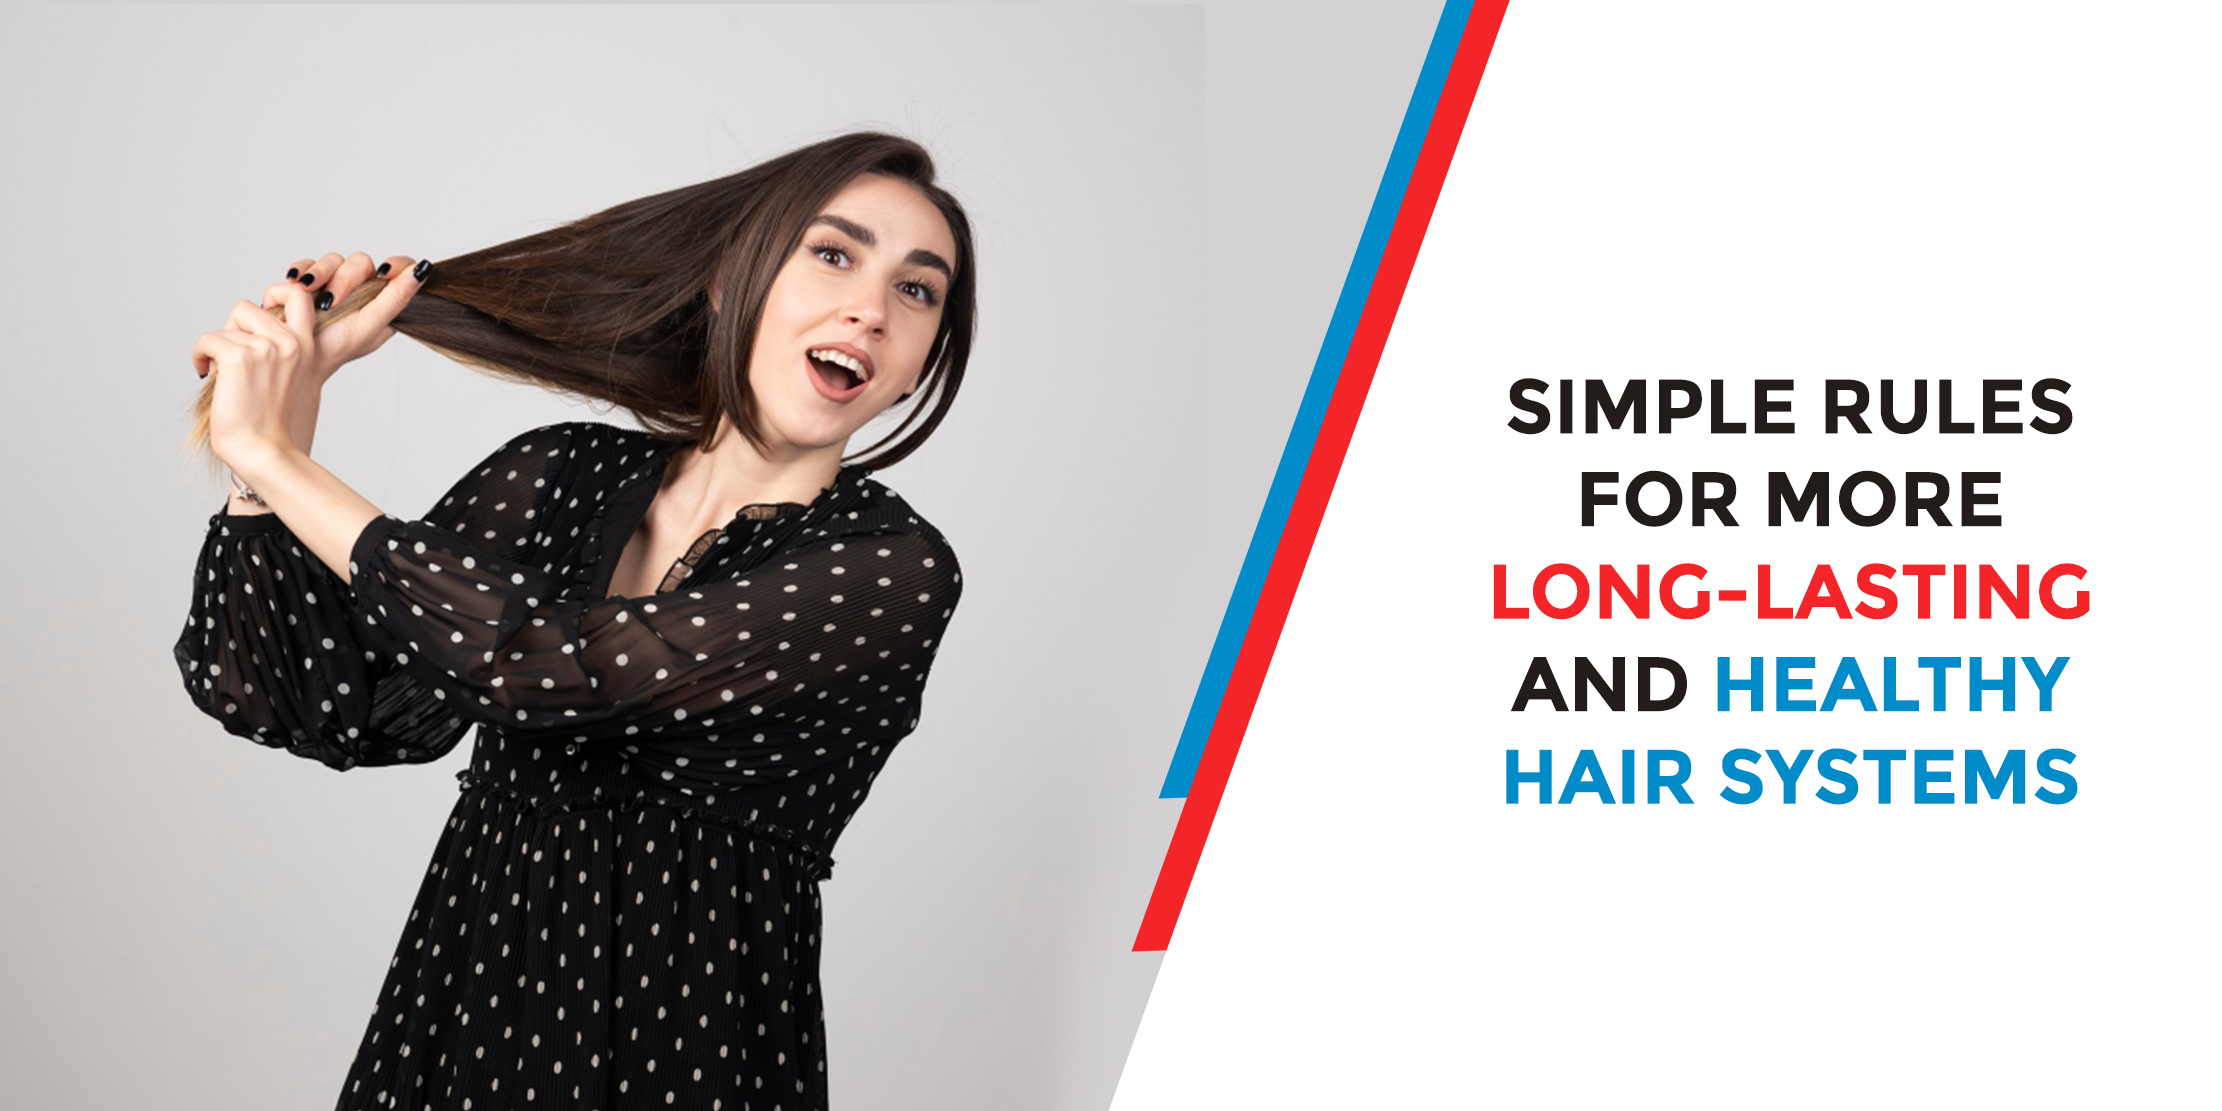 Simple rules for more long-lasting and healthy hair systems